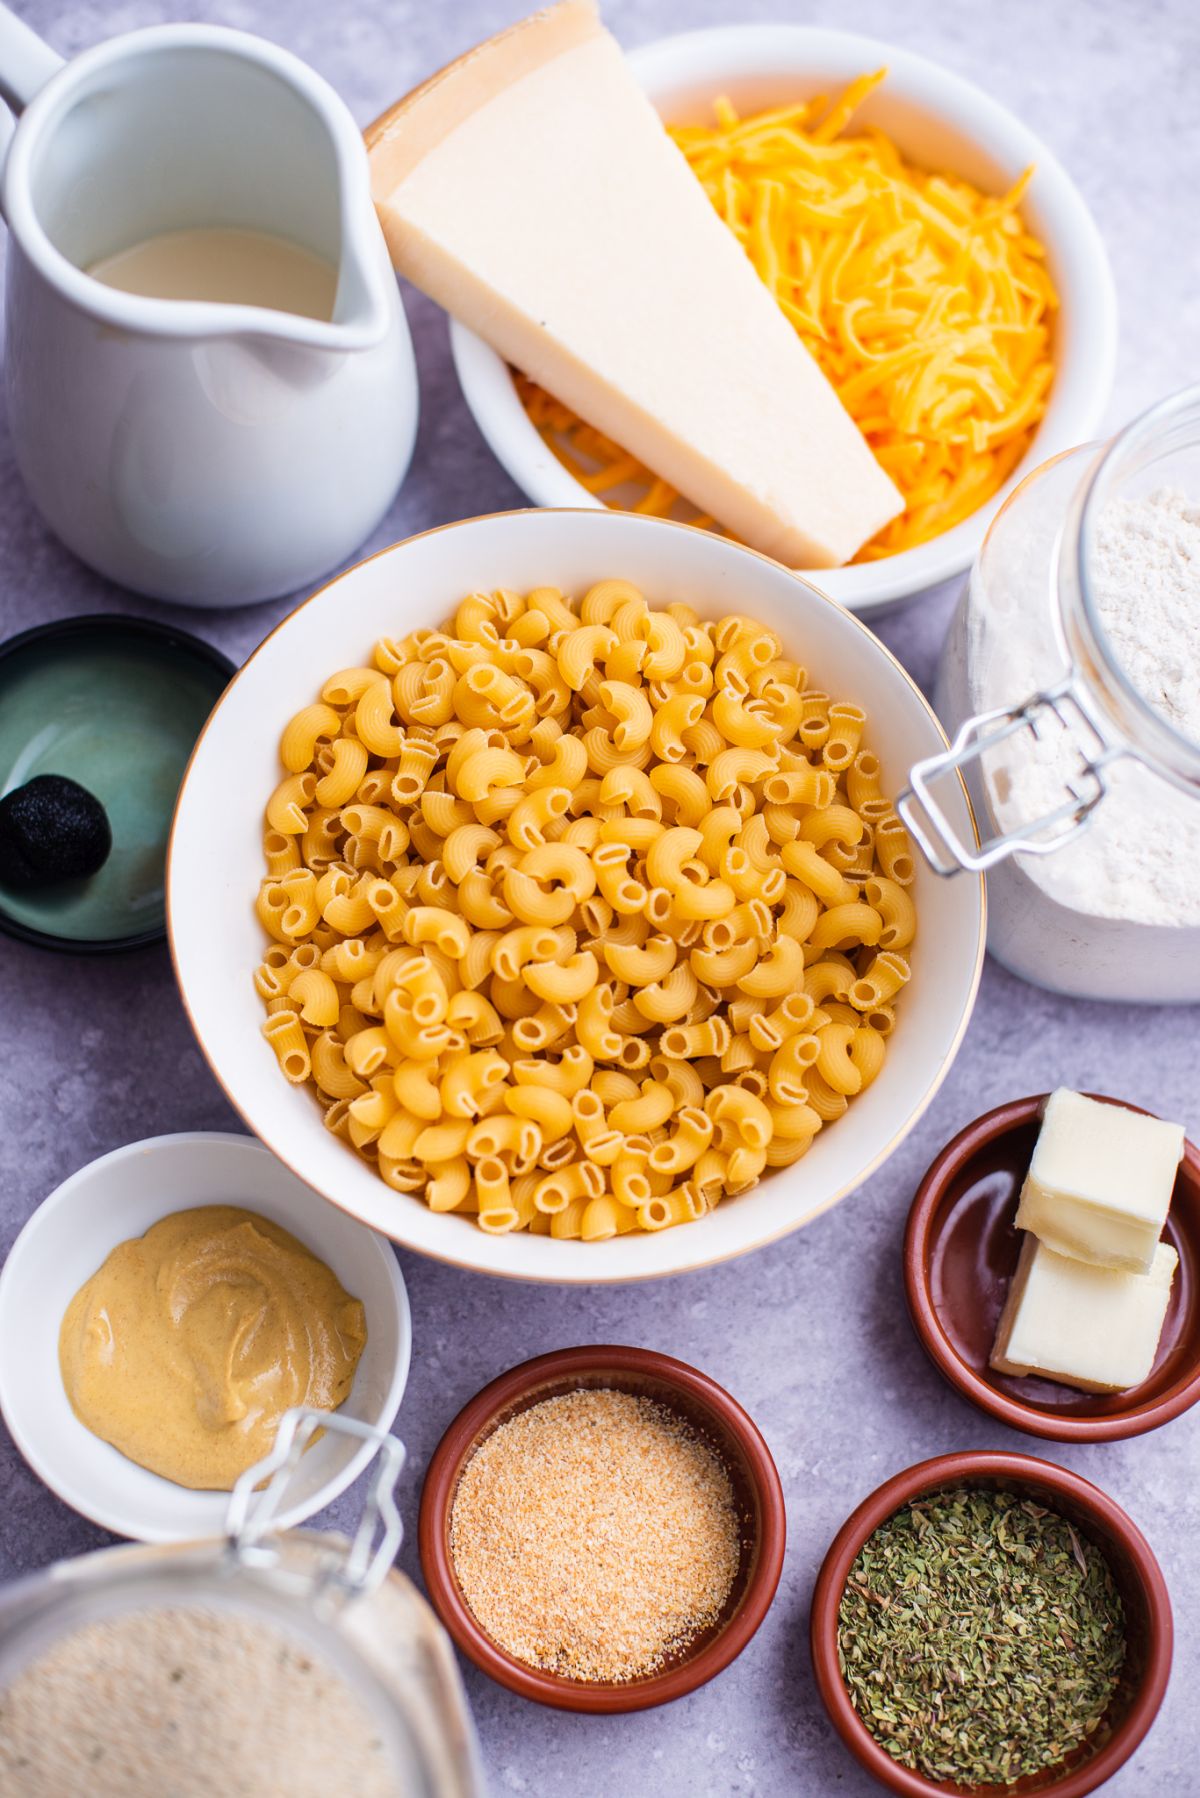 Truffle mac and cheese ingredients